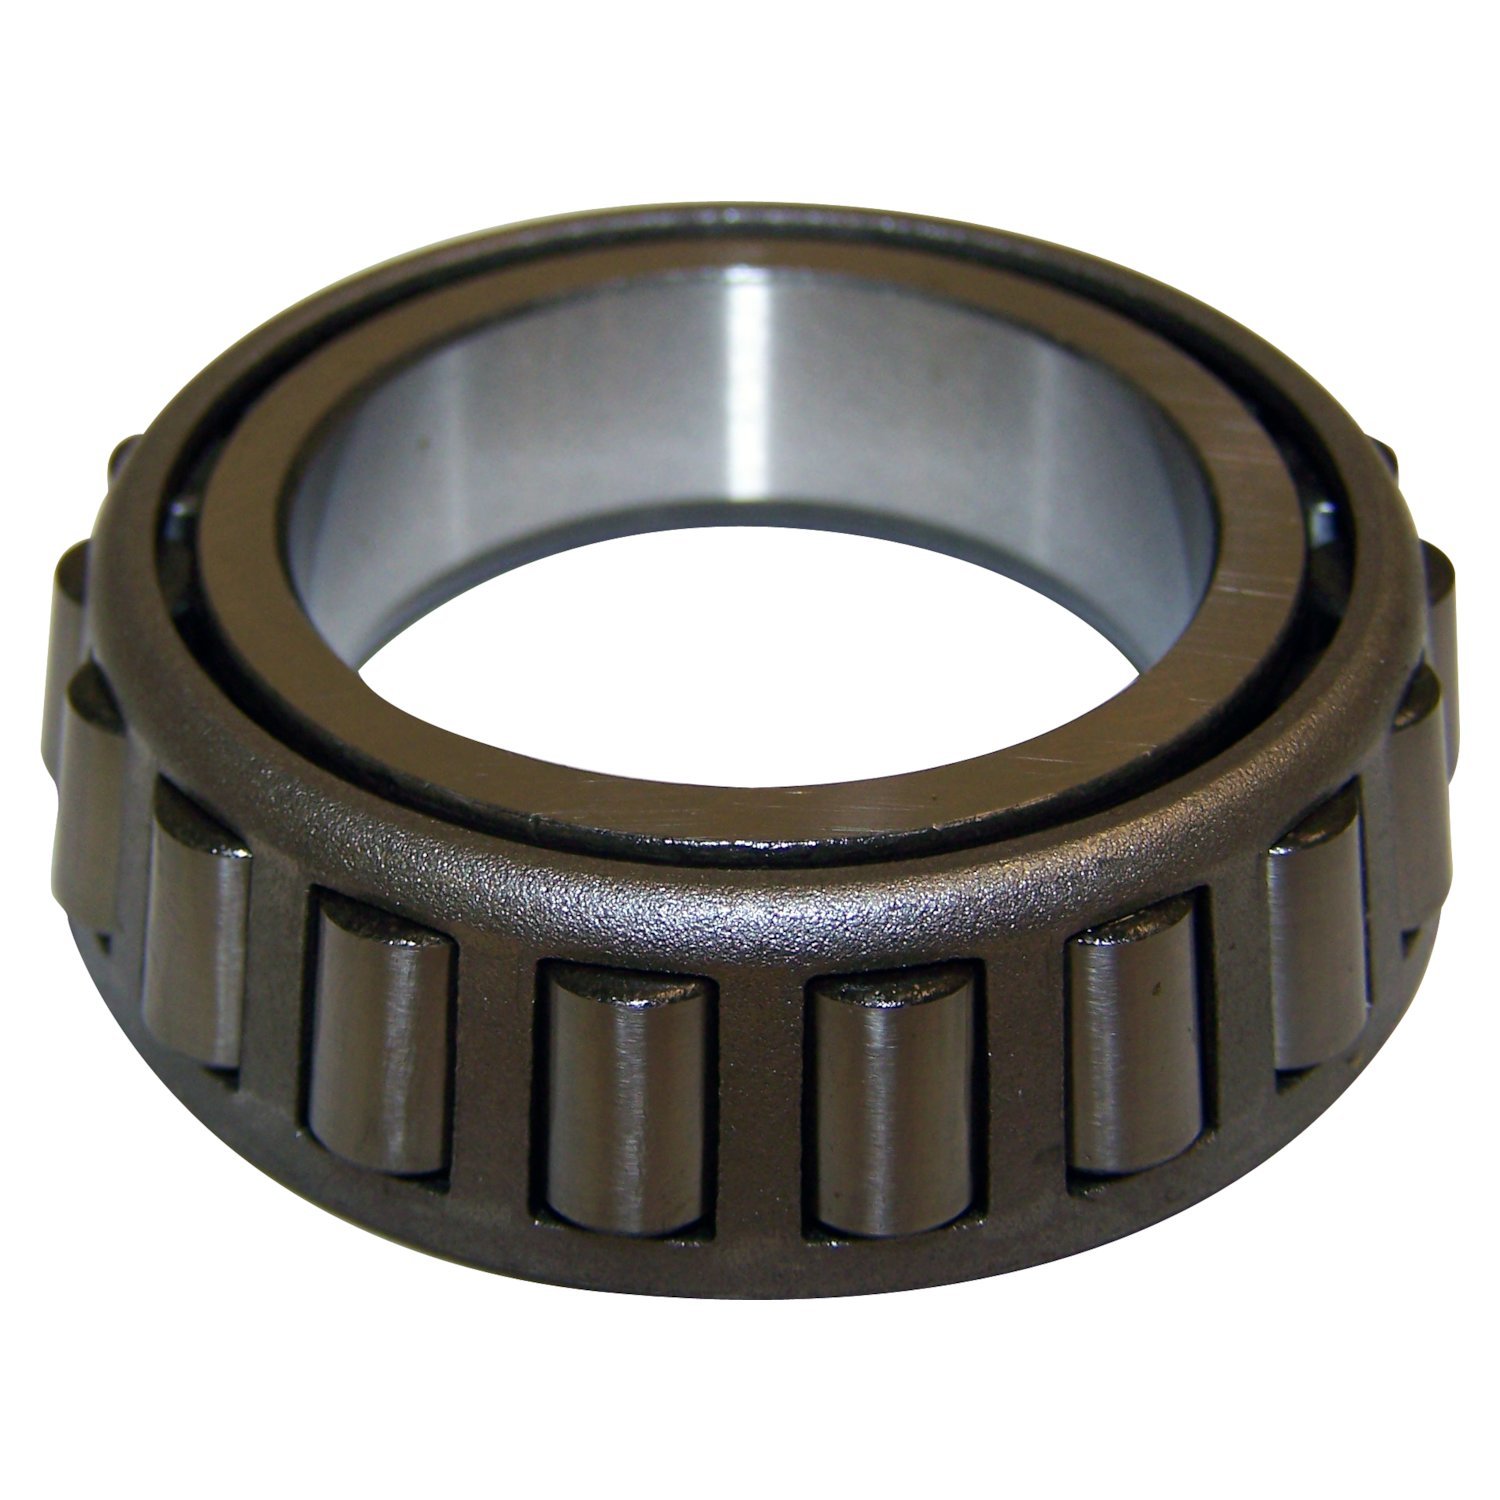 Inner or Outer Wheel Bearing for Numerous 1941 to 1965 Vintage Jeep Vehicles